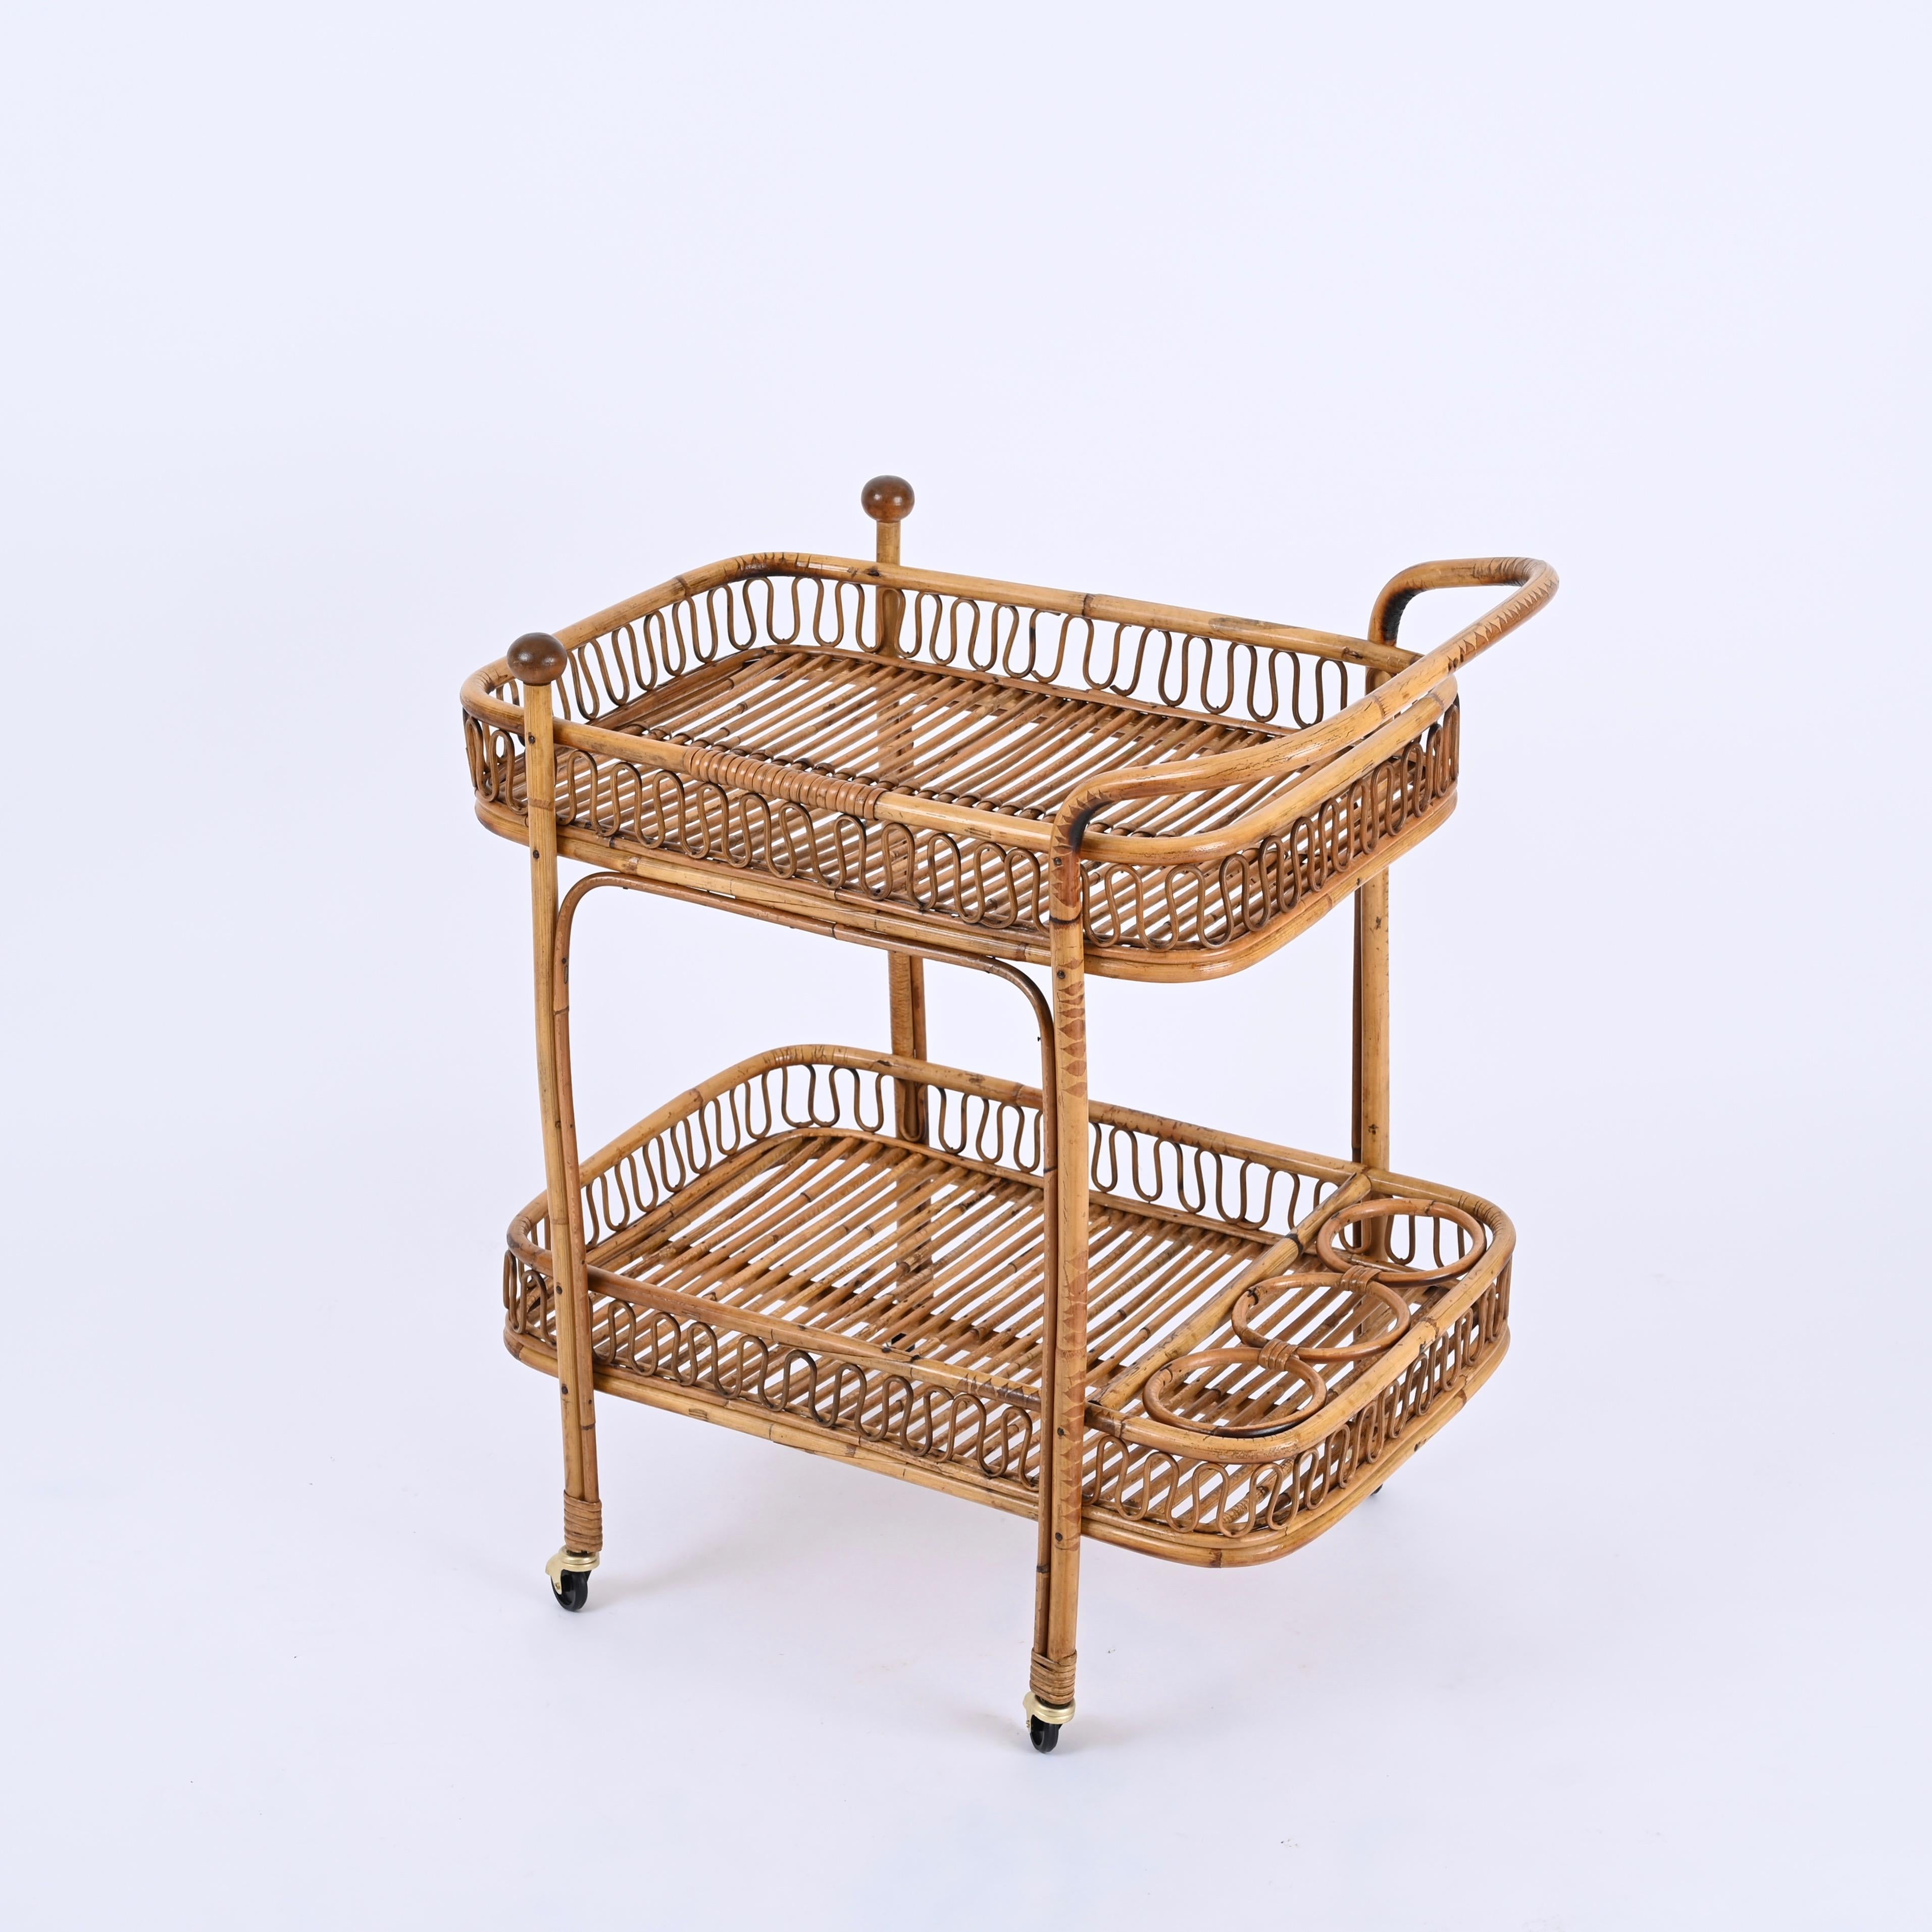 Hand-Crafted Midcentury Italian Bamboo and Rattan Rectangular Serving Bar Cart Trolley, 1960s